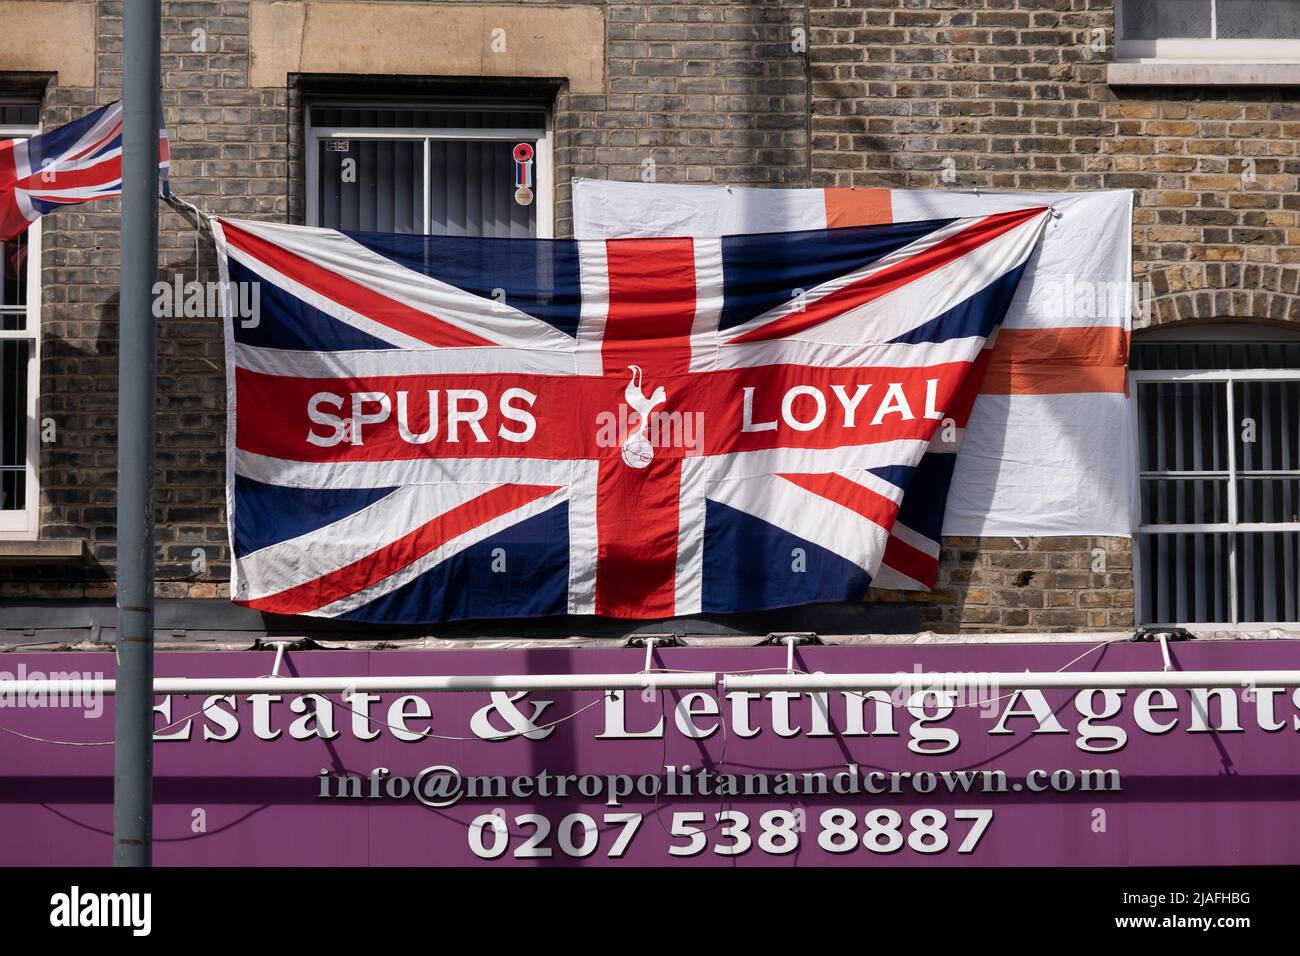 Spurs loyal Union Jack flag hanging from a flat above shops on 18th May 2022 in East London, United Kingdom. Tottenham Hotspur Football Club, commonly referred to as Spurs, is an English professional football club based in Tottenham, that competes in the Premier League. Stock Photo